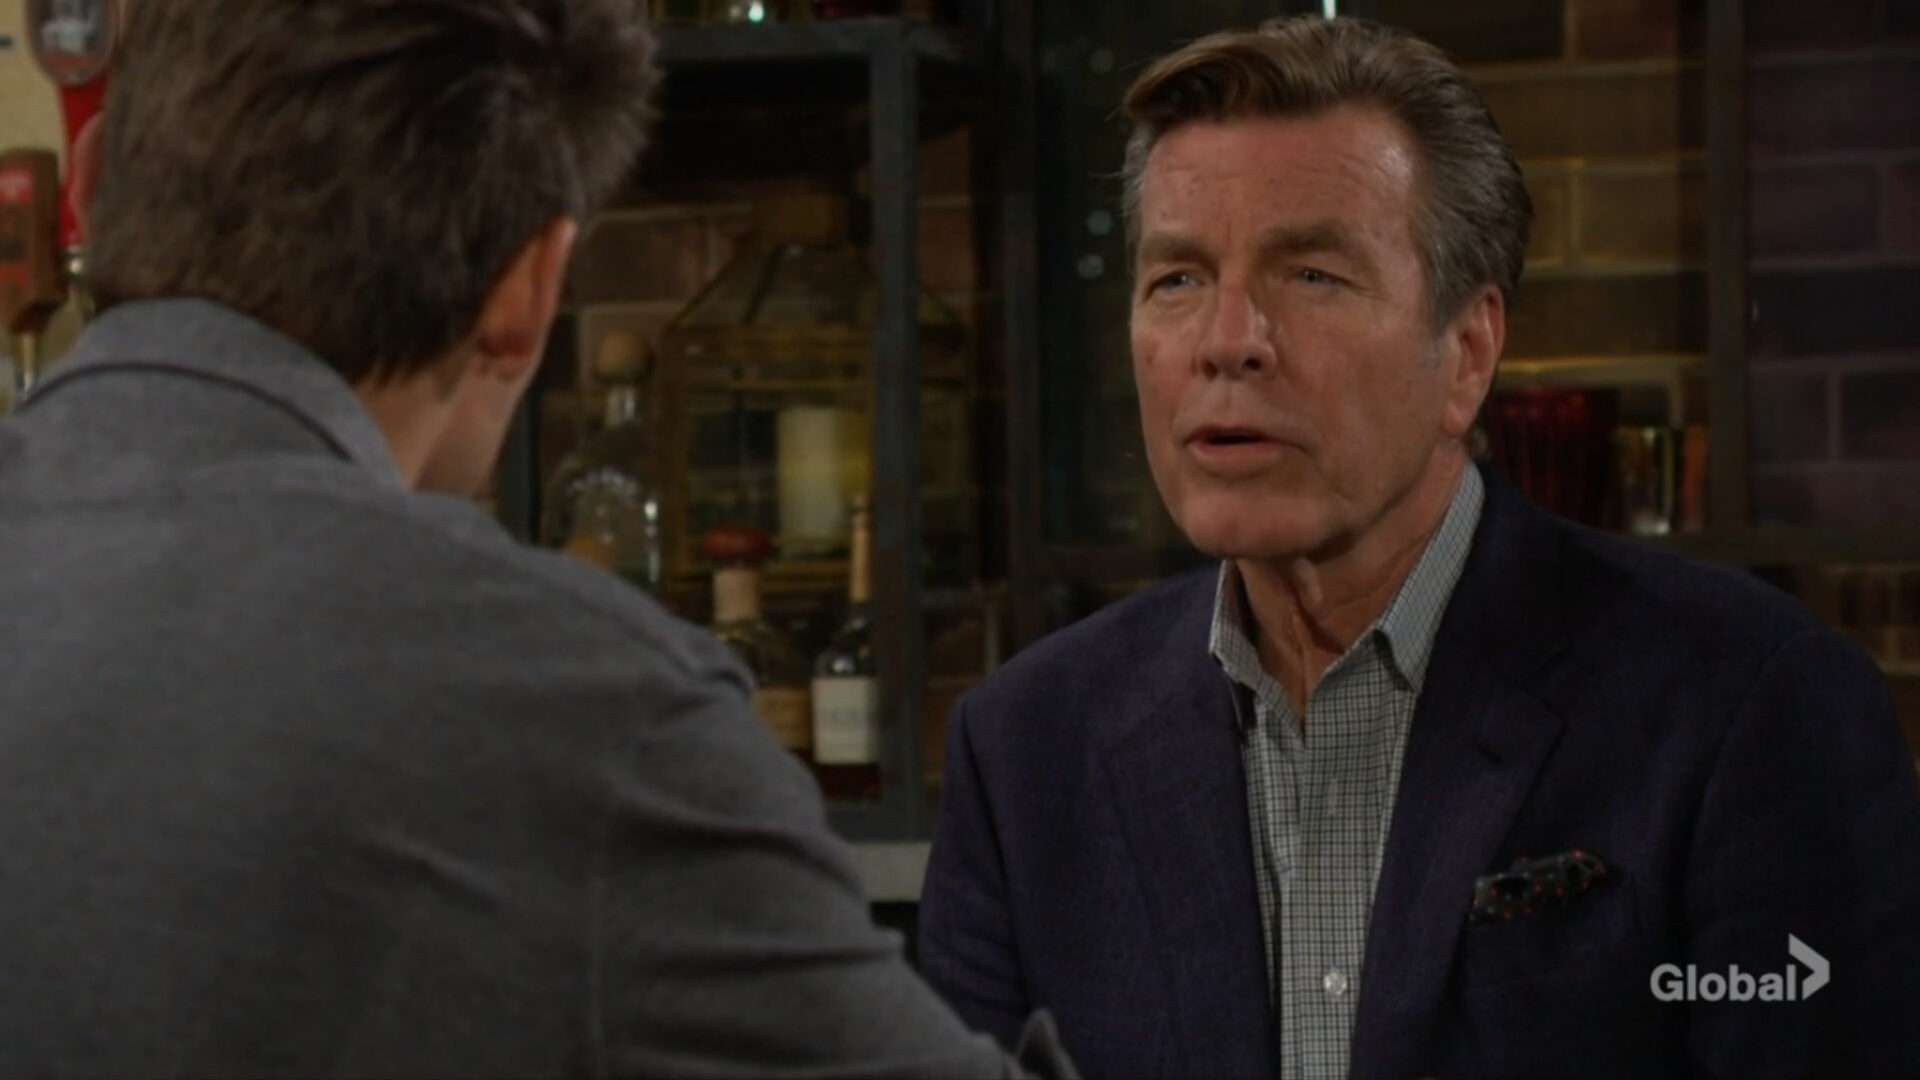 jack offeres adam job young and the restless cbs soapsspoilers